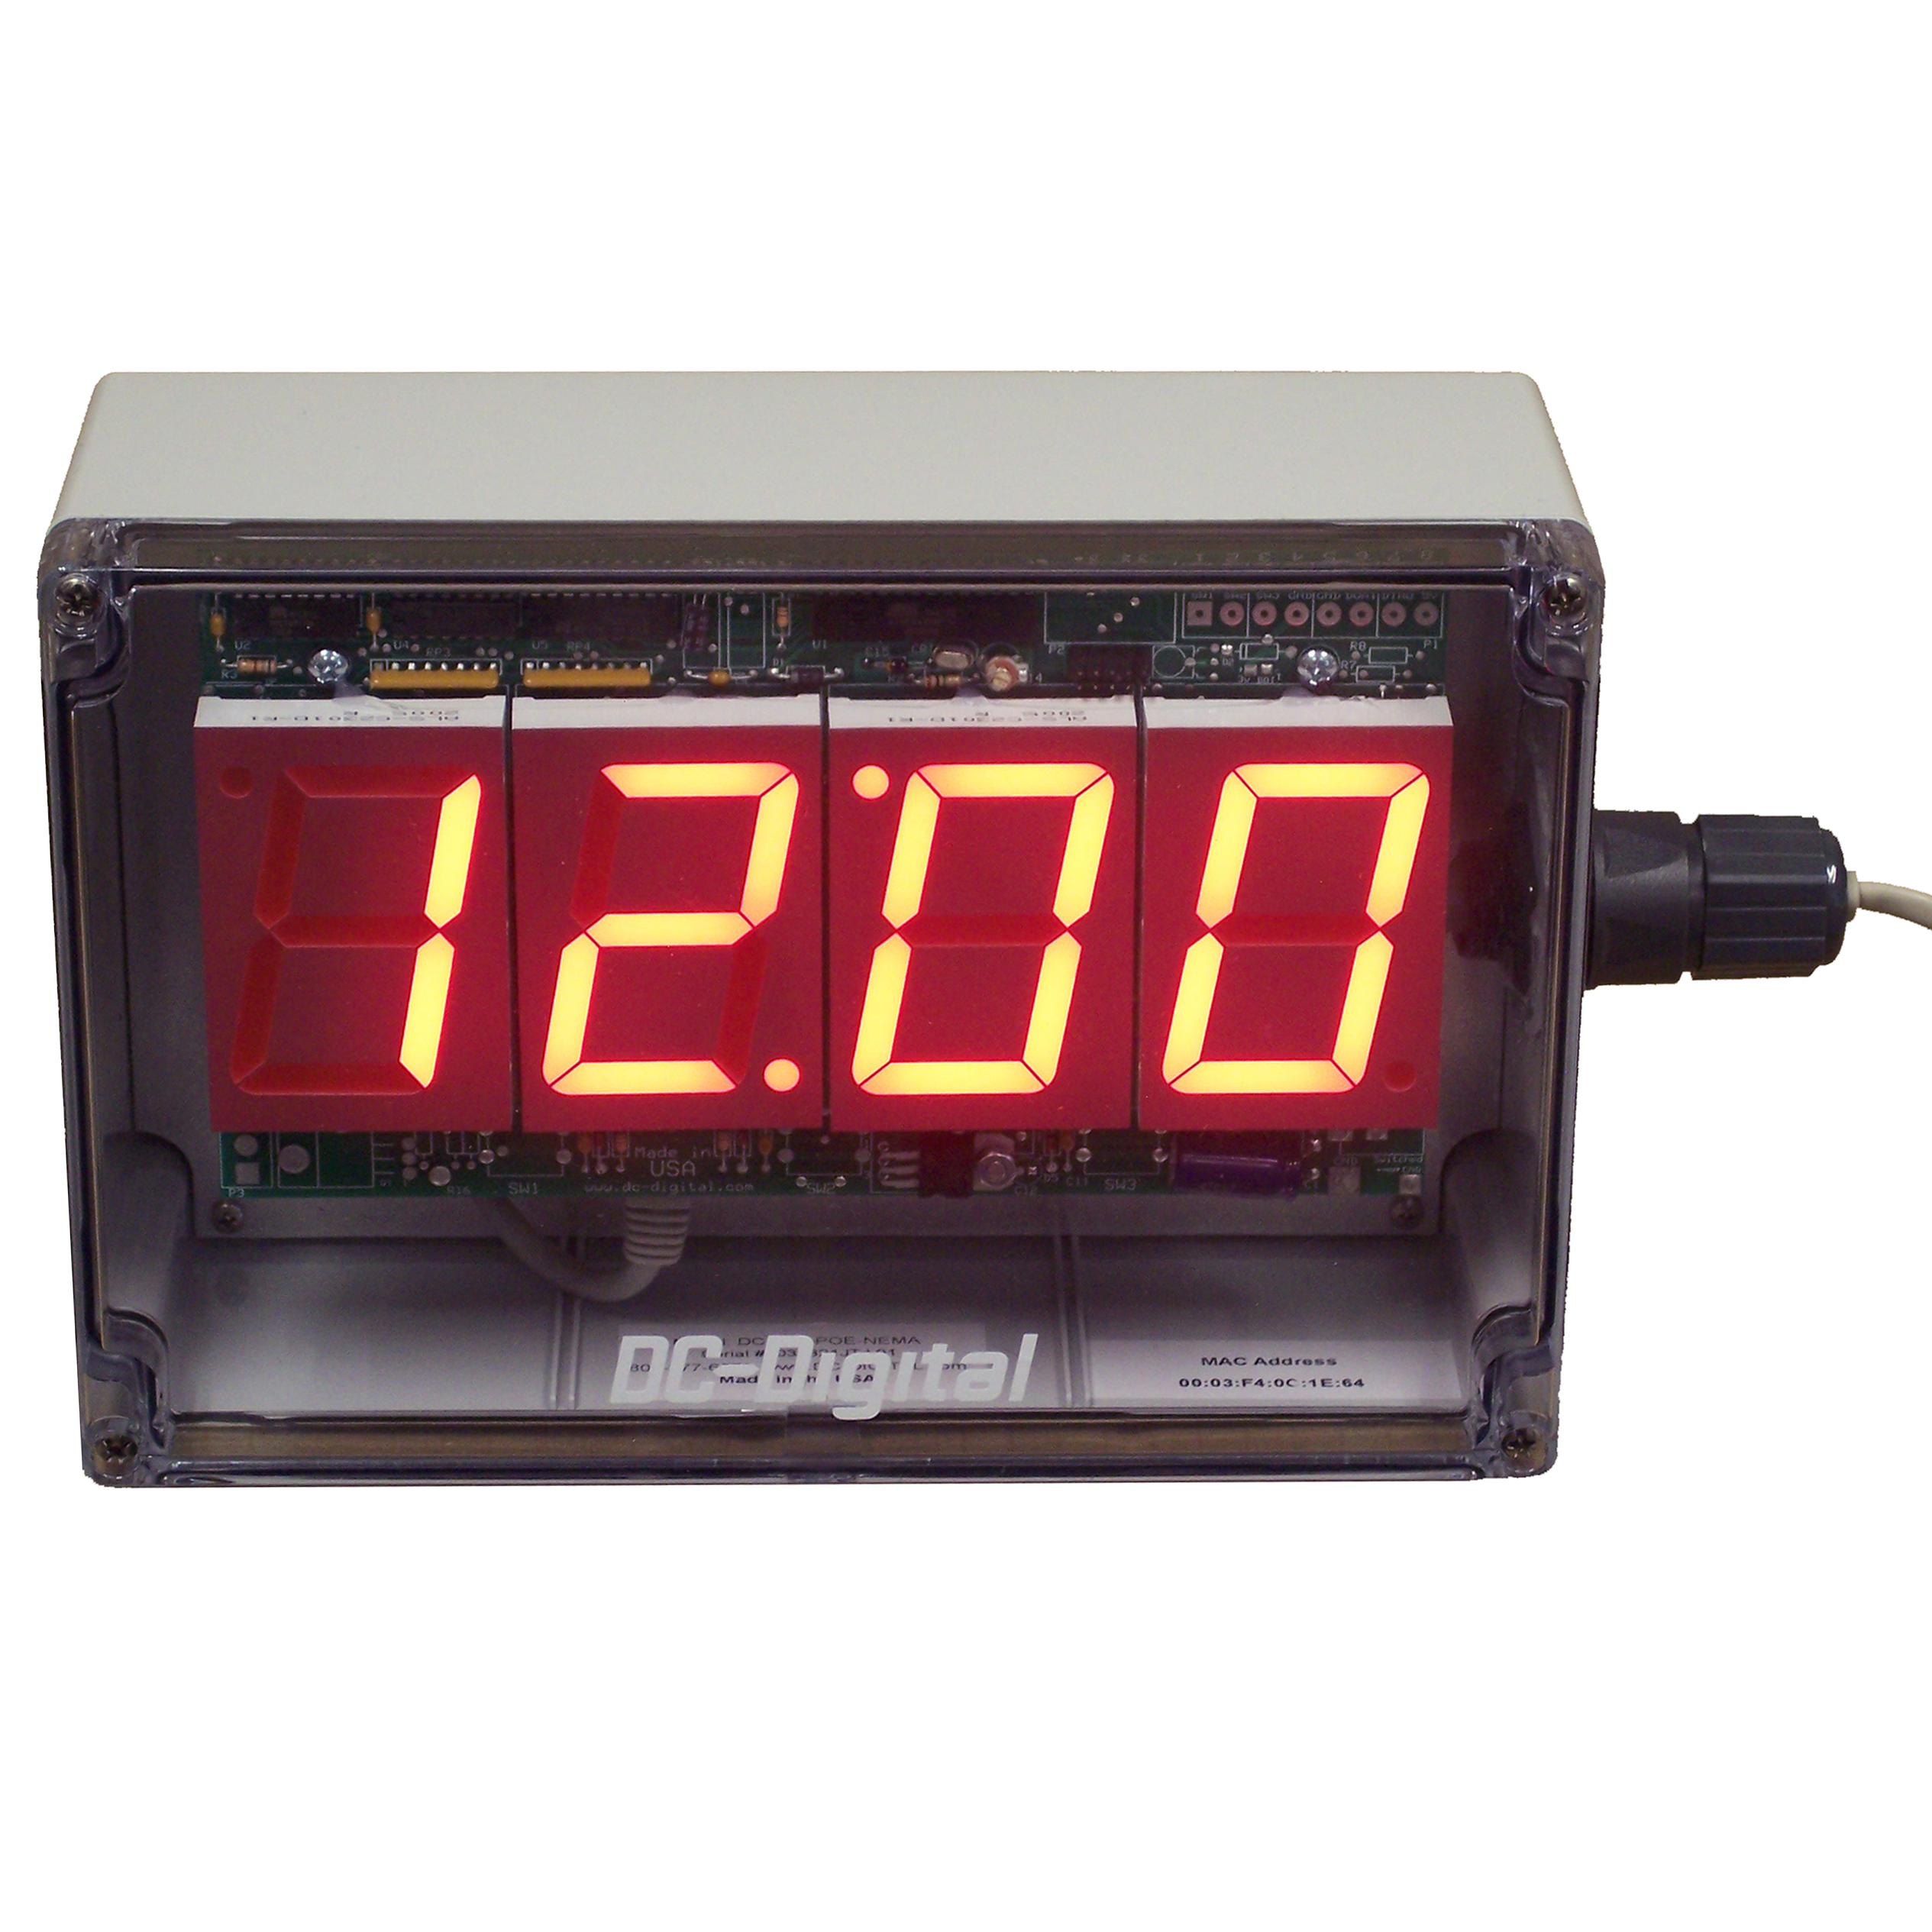 (DC-25N-POE-NEMA) 2.3 Inch LED, Network NTP Server Synchronized, Web Page Configurable, POE Powered, Atomic Digital Time of Day Clock in a Nema 4X,6,6P,12,12K,13, IP-66 Enclosure